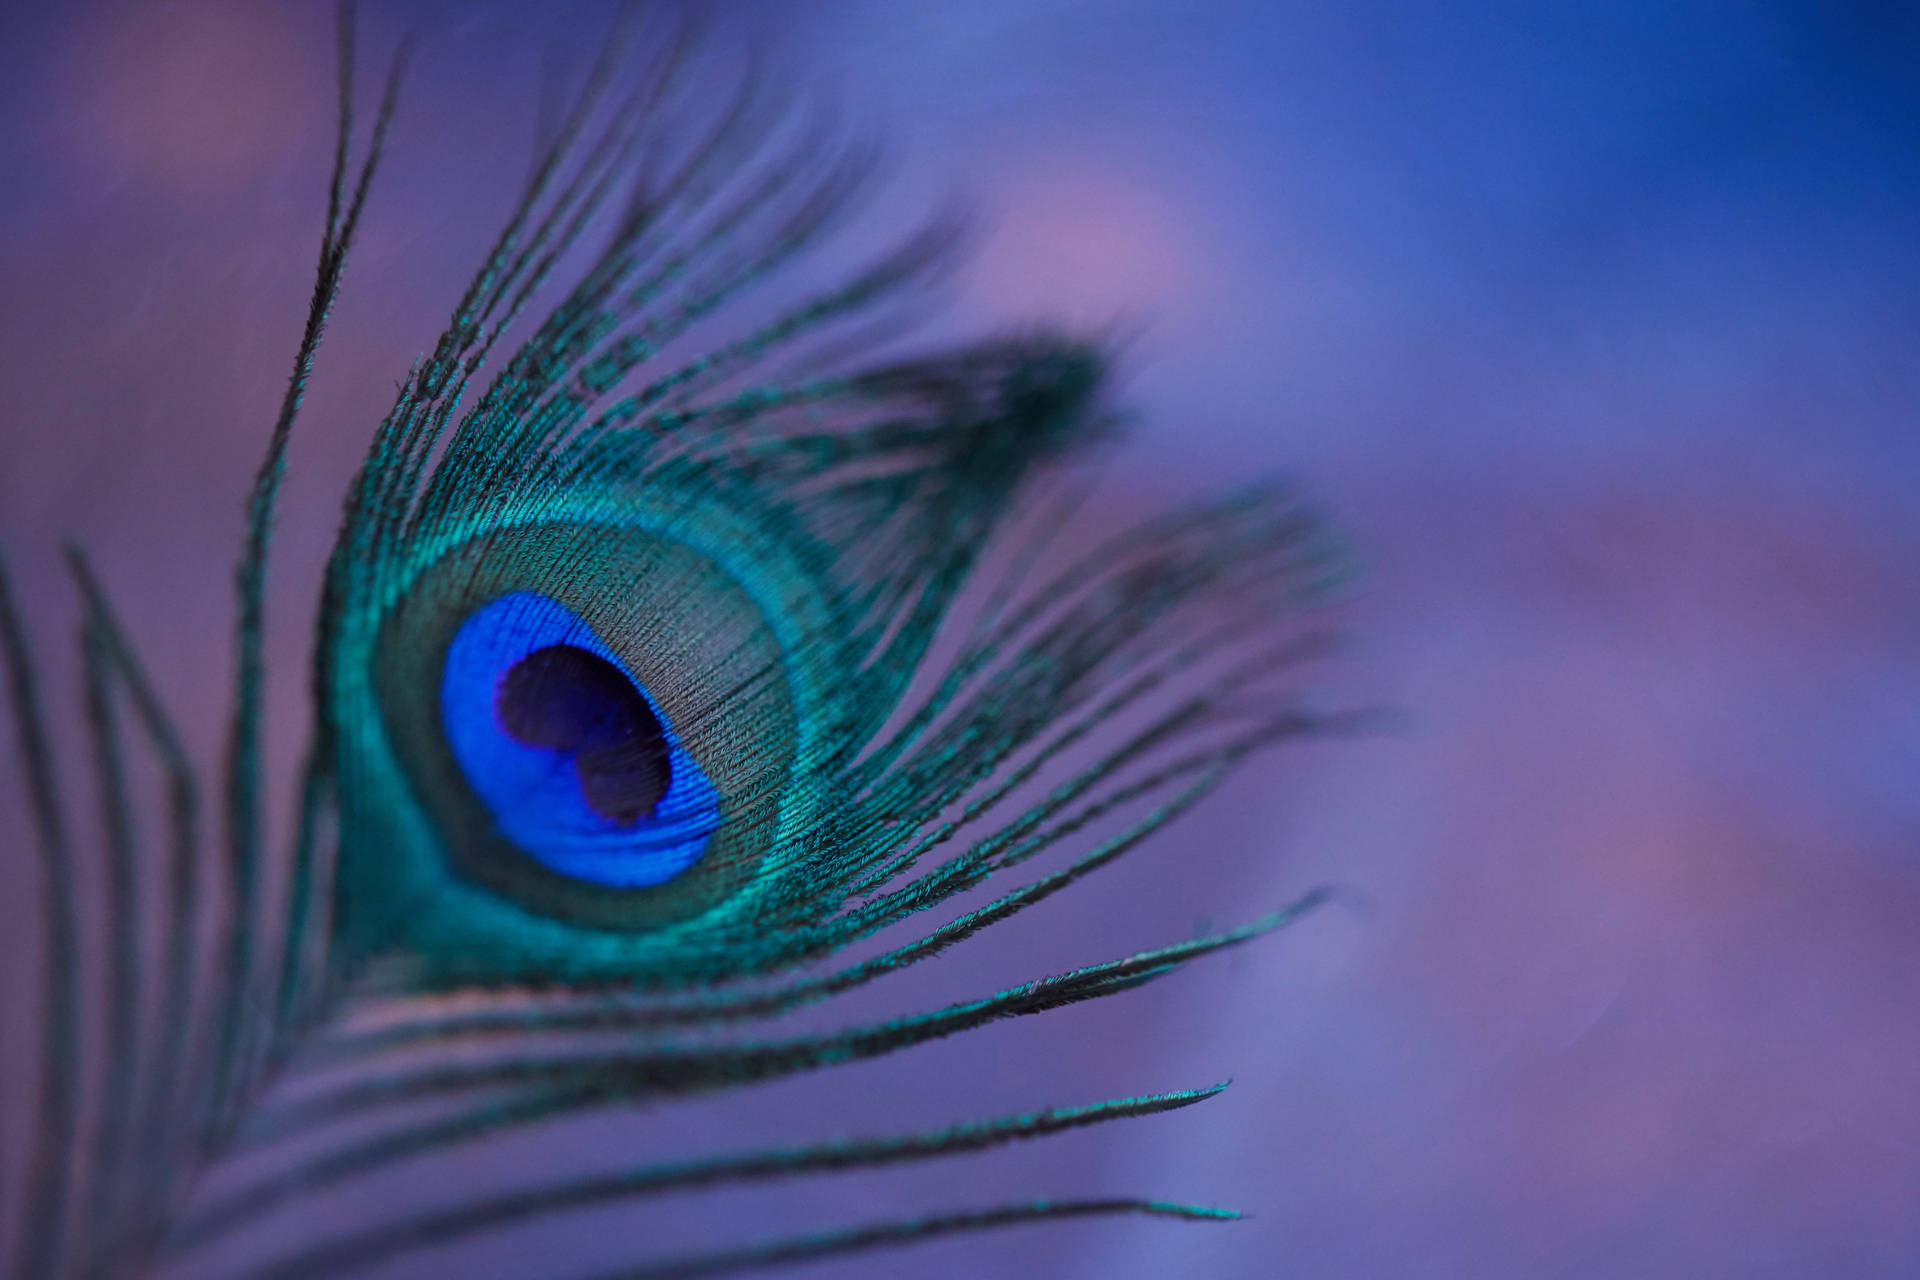 Radiant Blue-green Mor Pankh (peacock Feather) Against A High Contrast Background Background